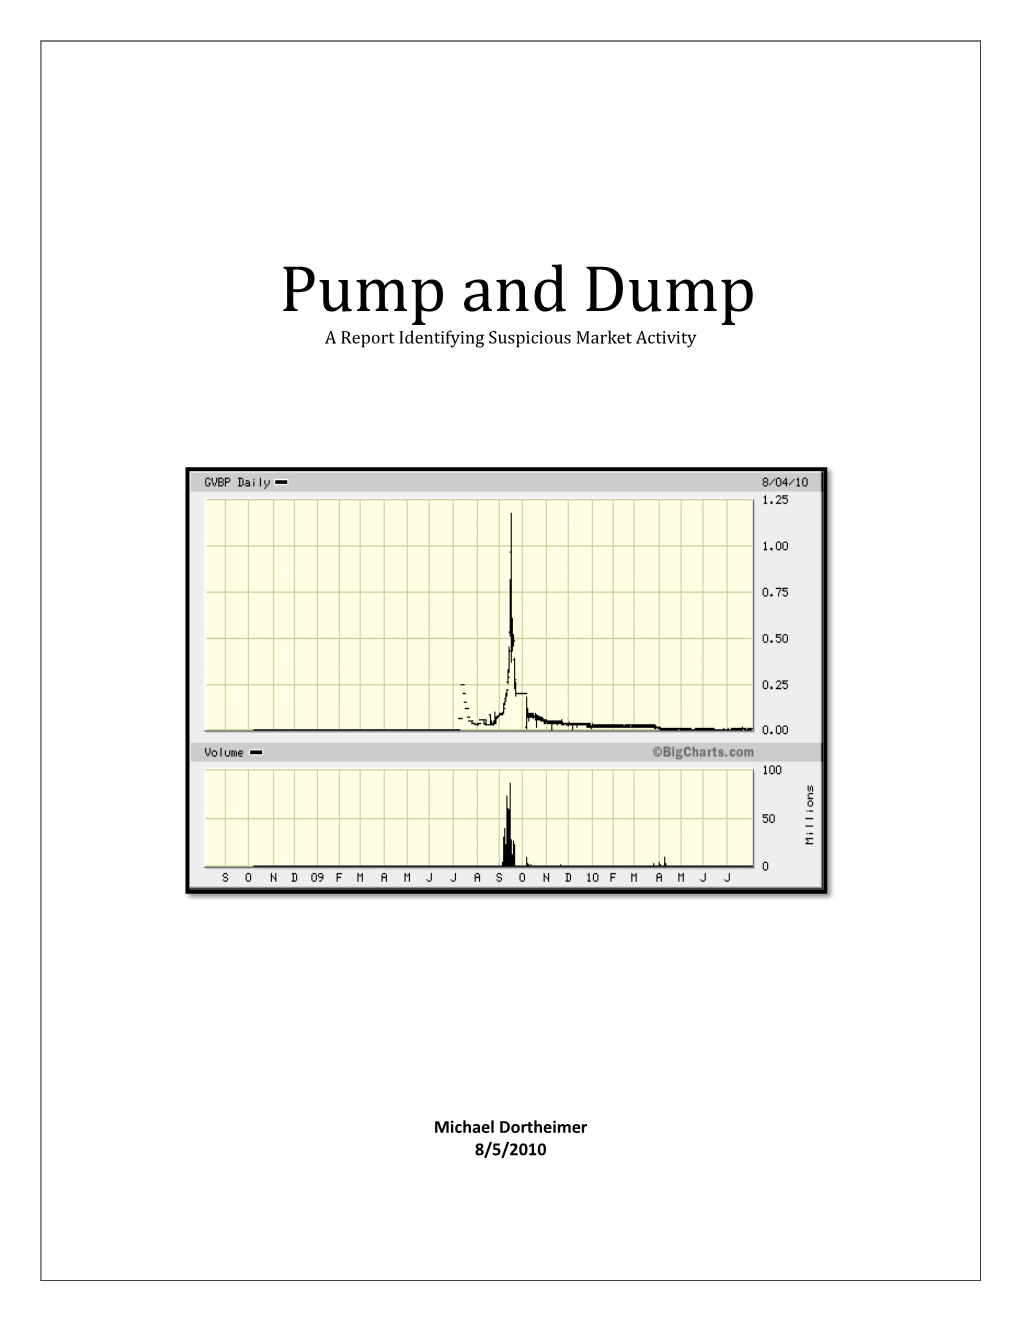 Pump and Dump a Report Identifying Suspicious Market Activity